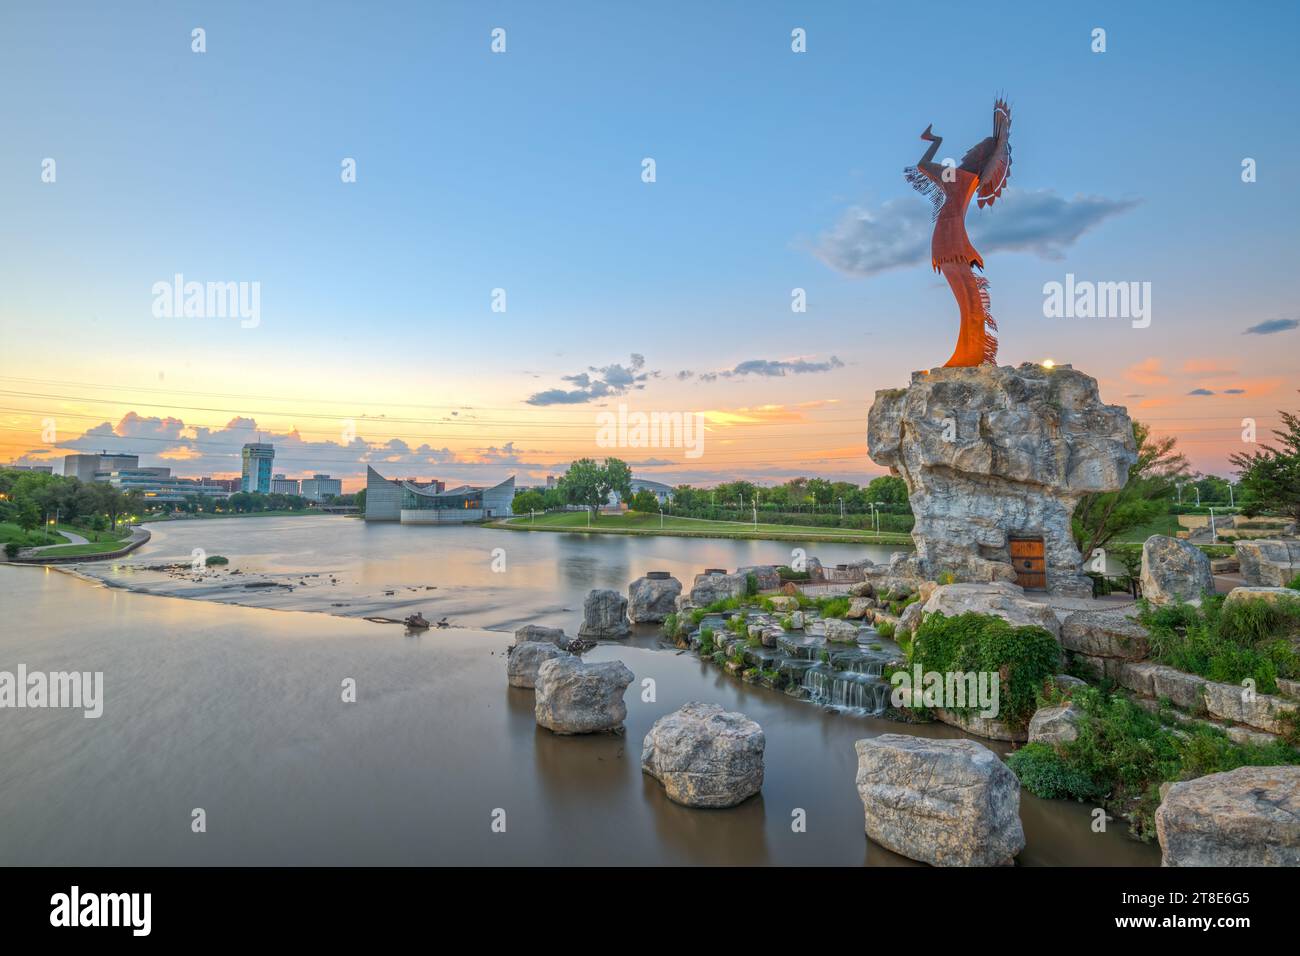 WICHITA, KANSAS - AUGUS 31, 2018: Downtown Wichita at dawn from the Arkansas River and Keeper of the Plains. Stock Photo